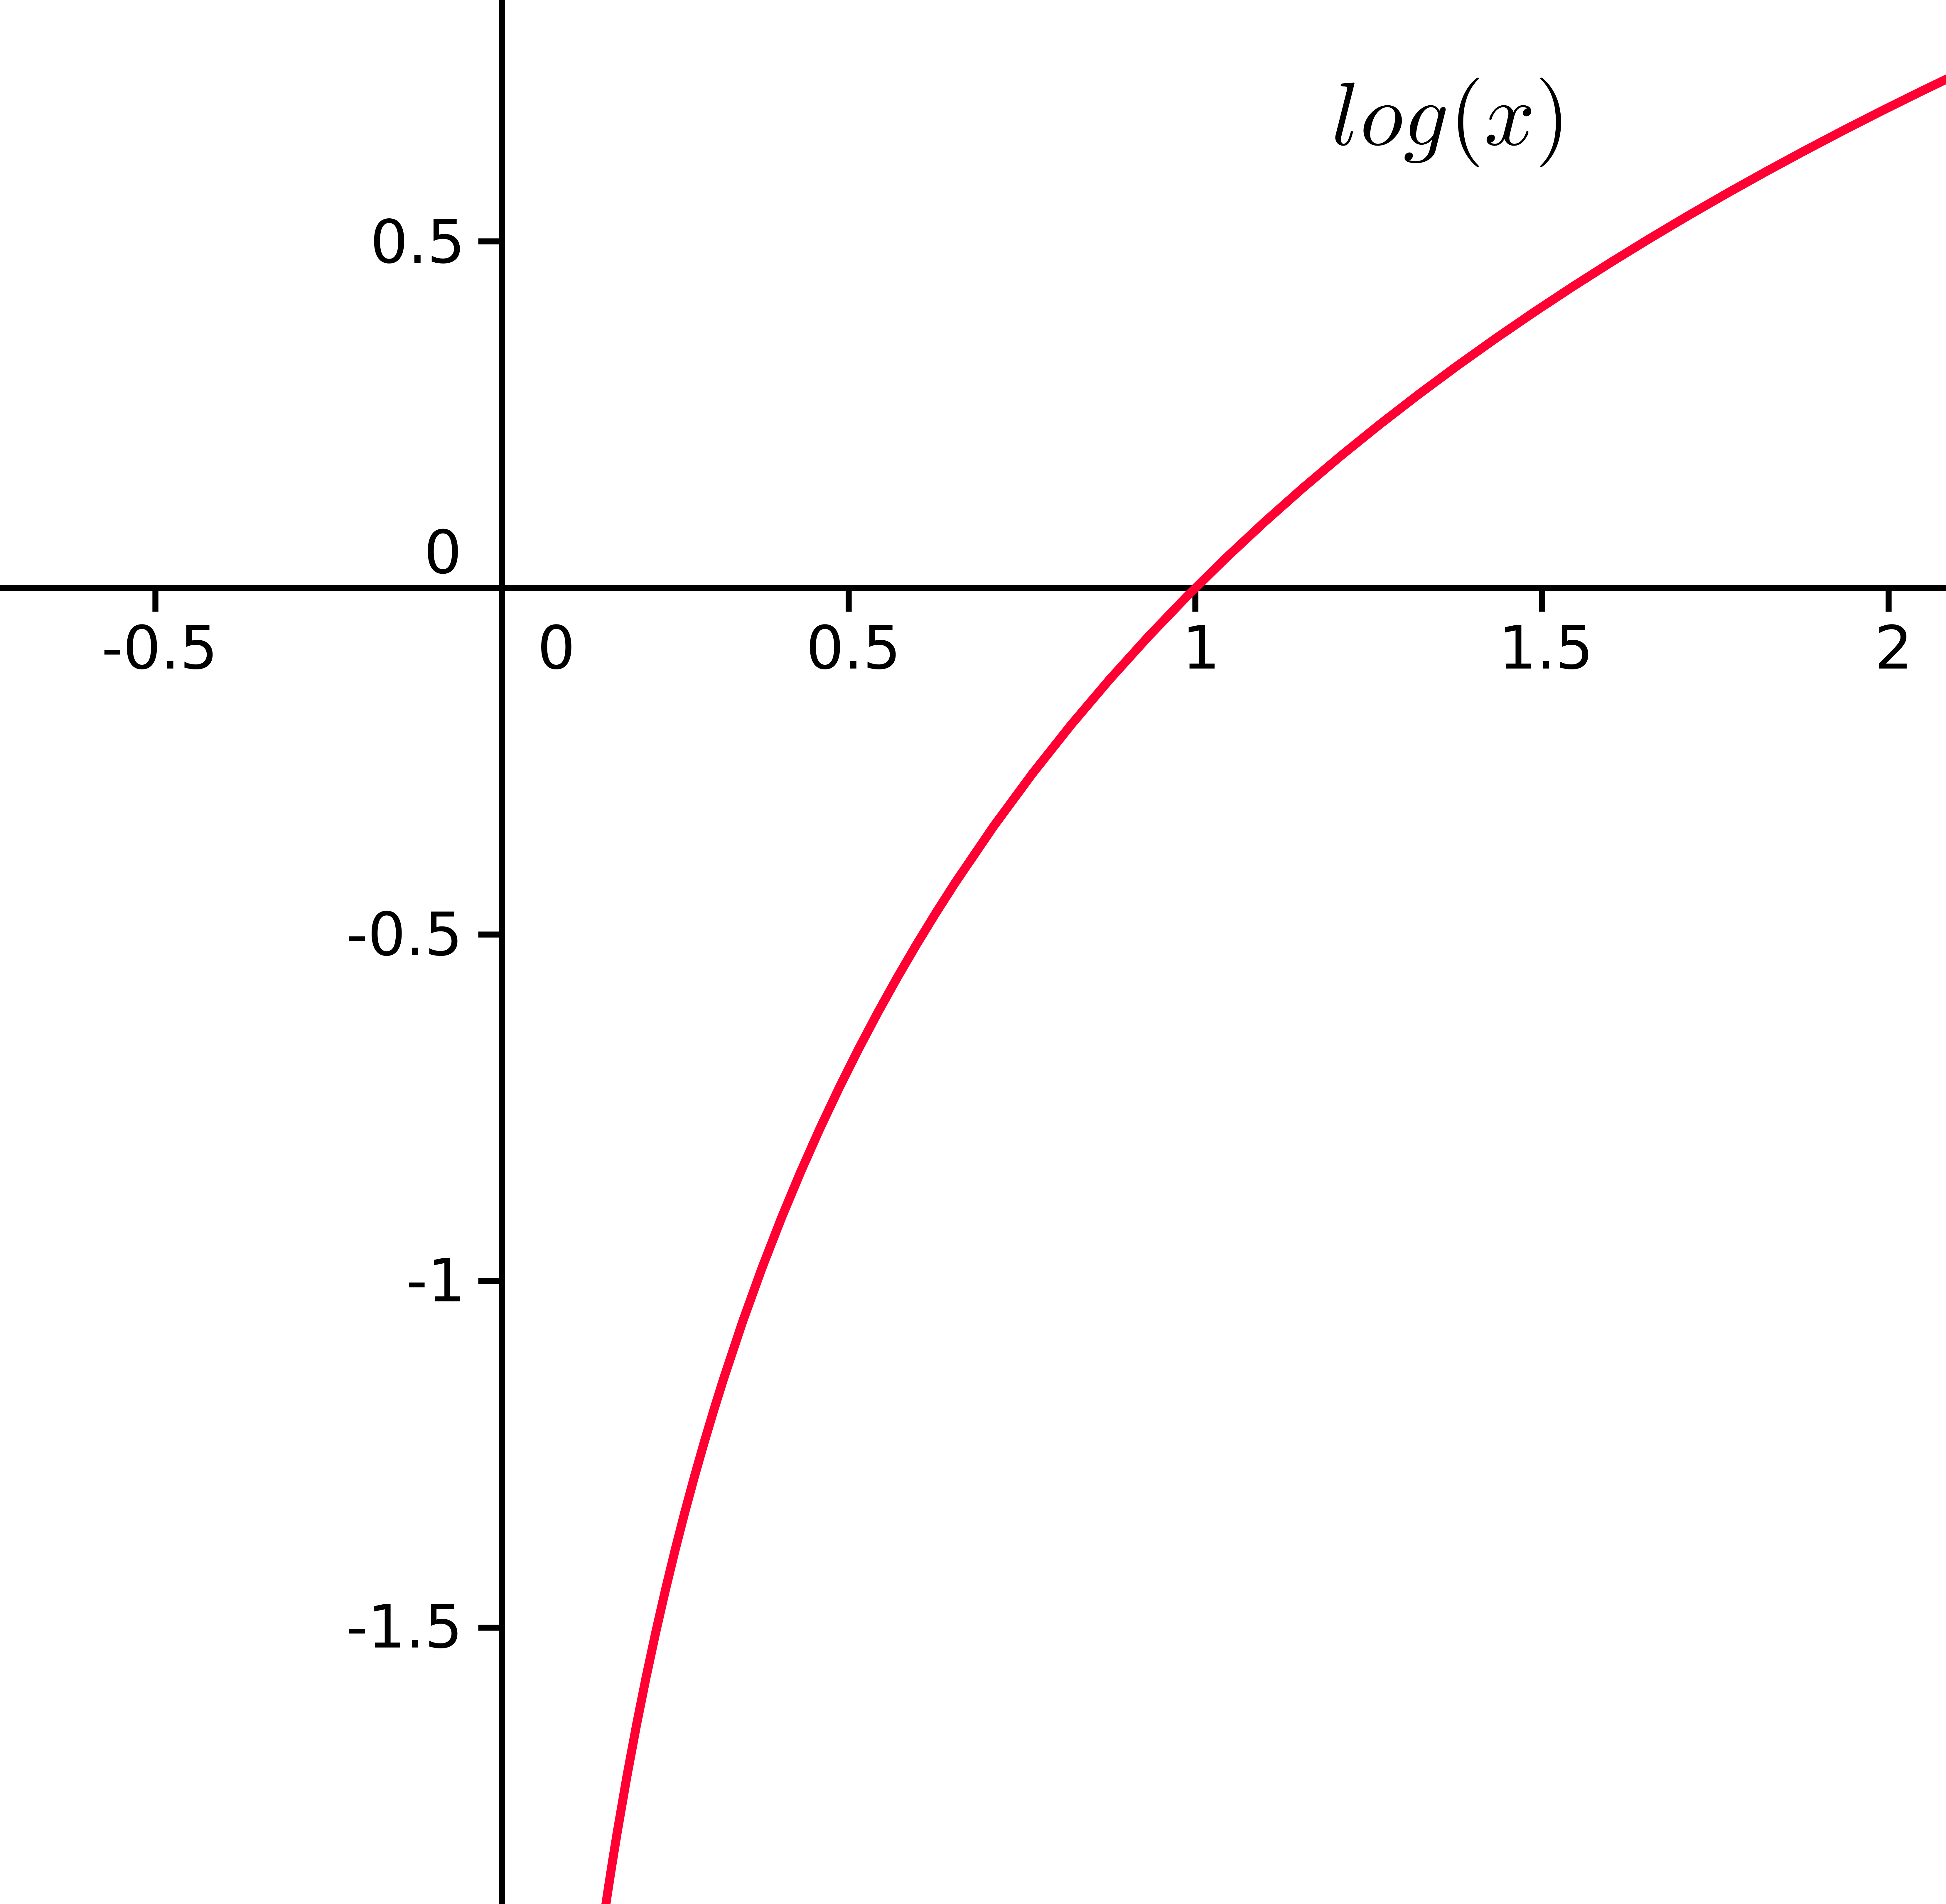 A plot of log(x). For x values between 0 and 1, log(x) &lt;0 (is negative). (Source: Author).